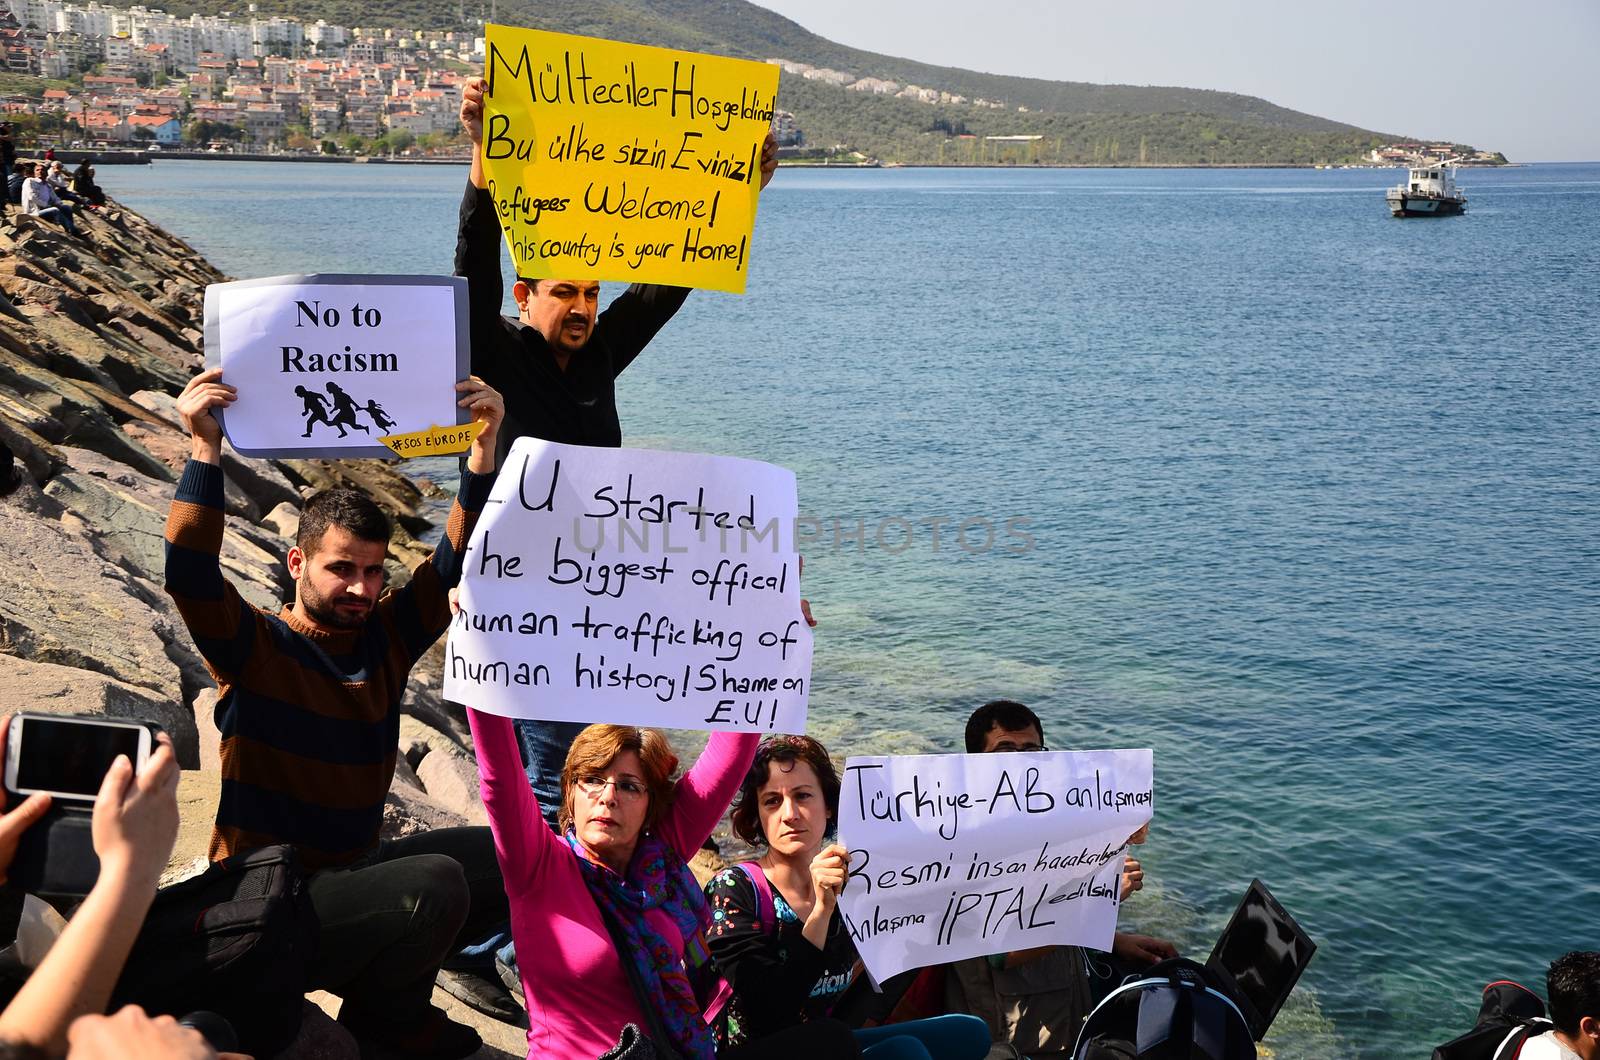 TURKEY, Dikili: A woman holds a sign reading EU started the biggest official human trafficking of human history. Shame on EU! as migrants who are deported from Lesbos and Chios islands in Greece to Turkey, arrive on April 4, 2016 in the port of Dikili, in Izmir district. Migrants return from Greece to Turkey begun under the terms of an EU deal that has worried aid groups, as Athens struggles to manage the overload of desperate people on its soil. Over 51,000 refugees and migrants seeking to reach northern Europe are stuck in Greece, after Balkan states sealed their borders. Hundreds more continue to land on the Greek islands every day despite the EU deal.